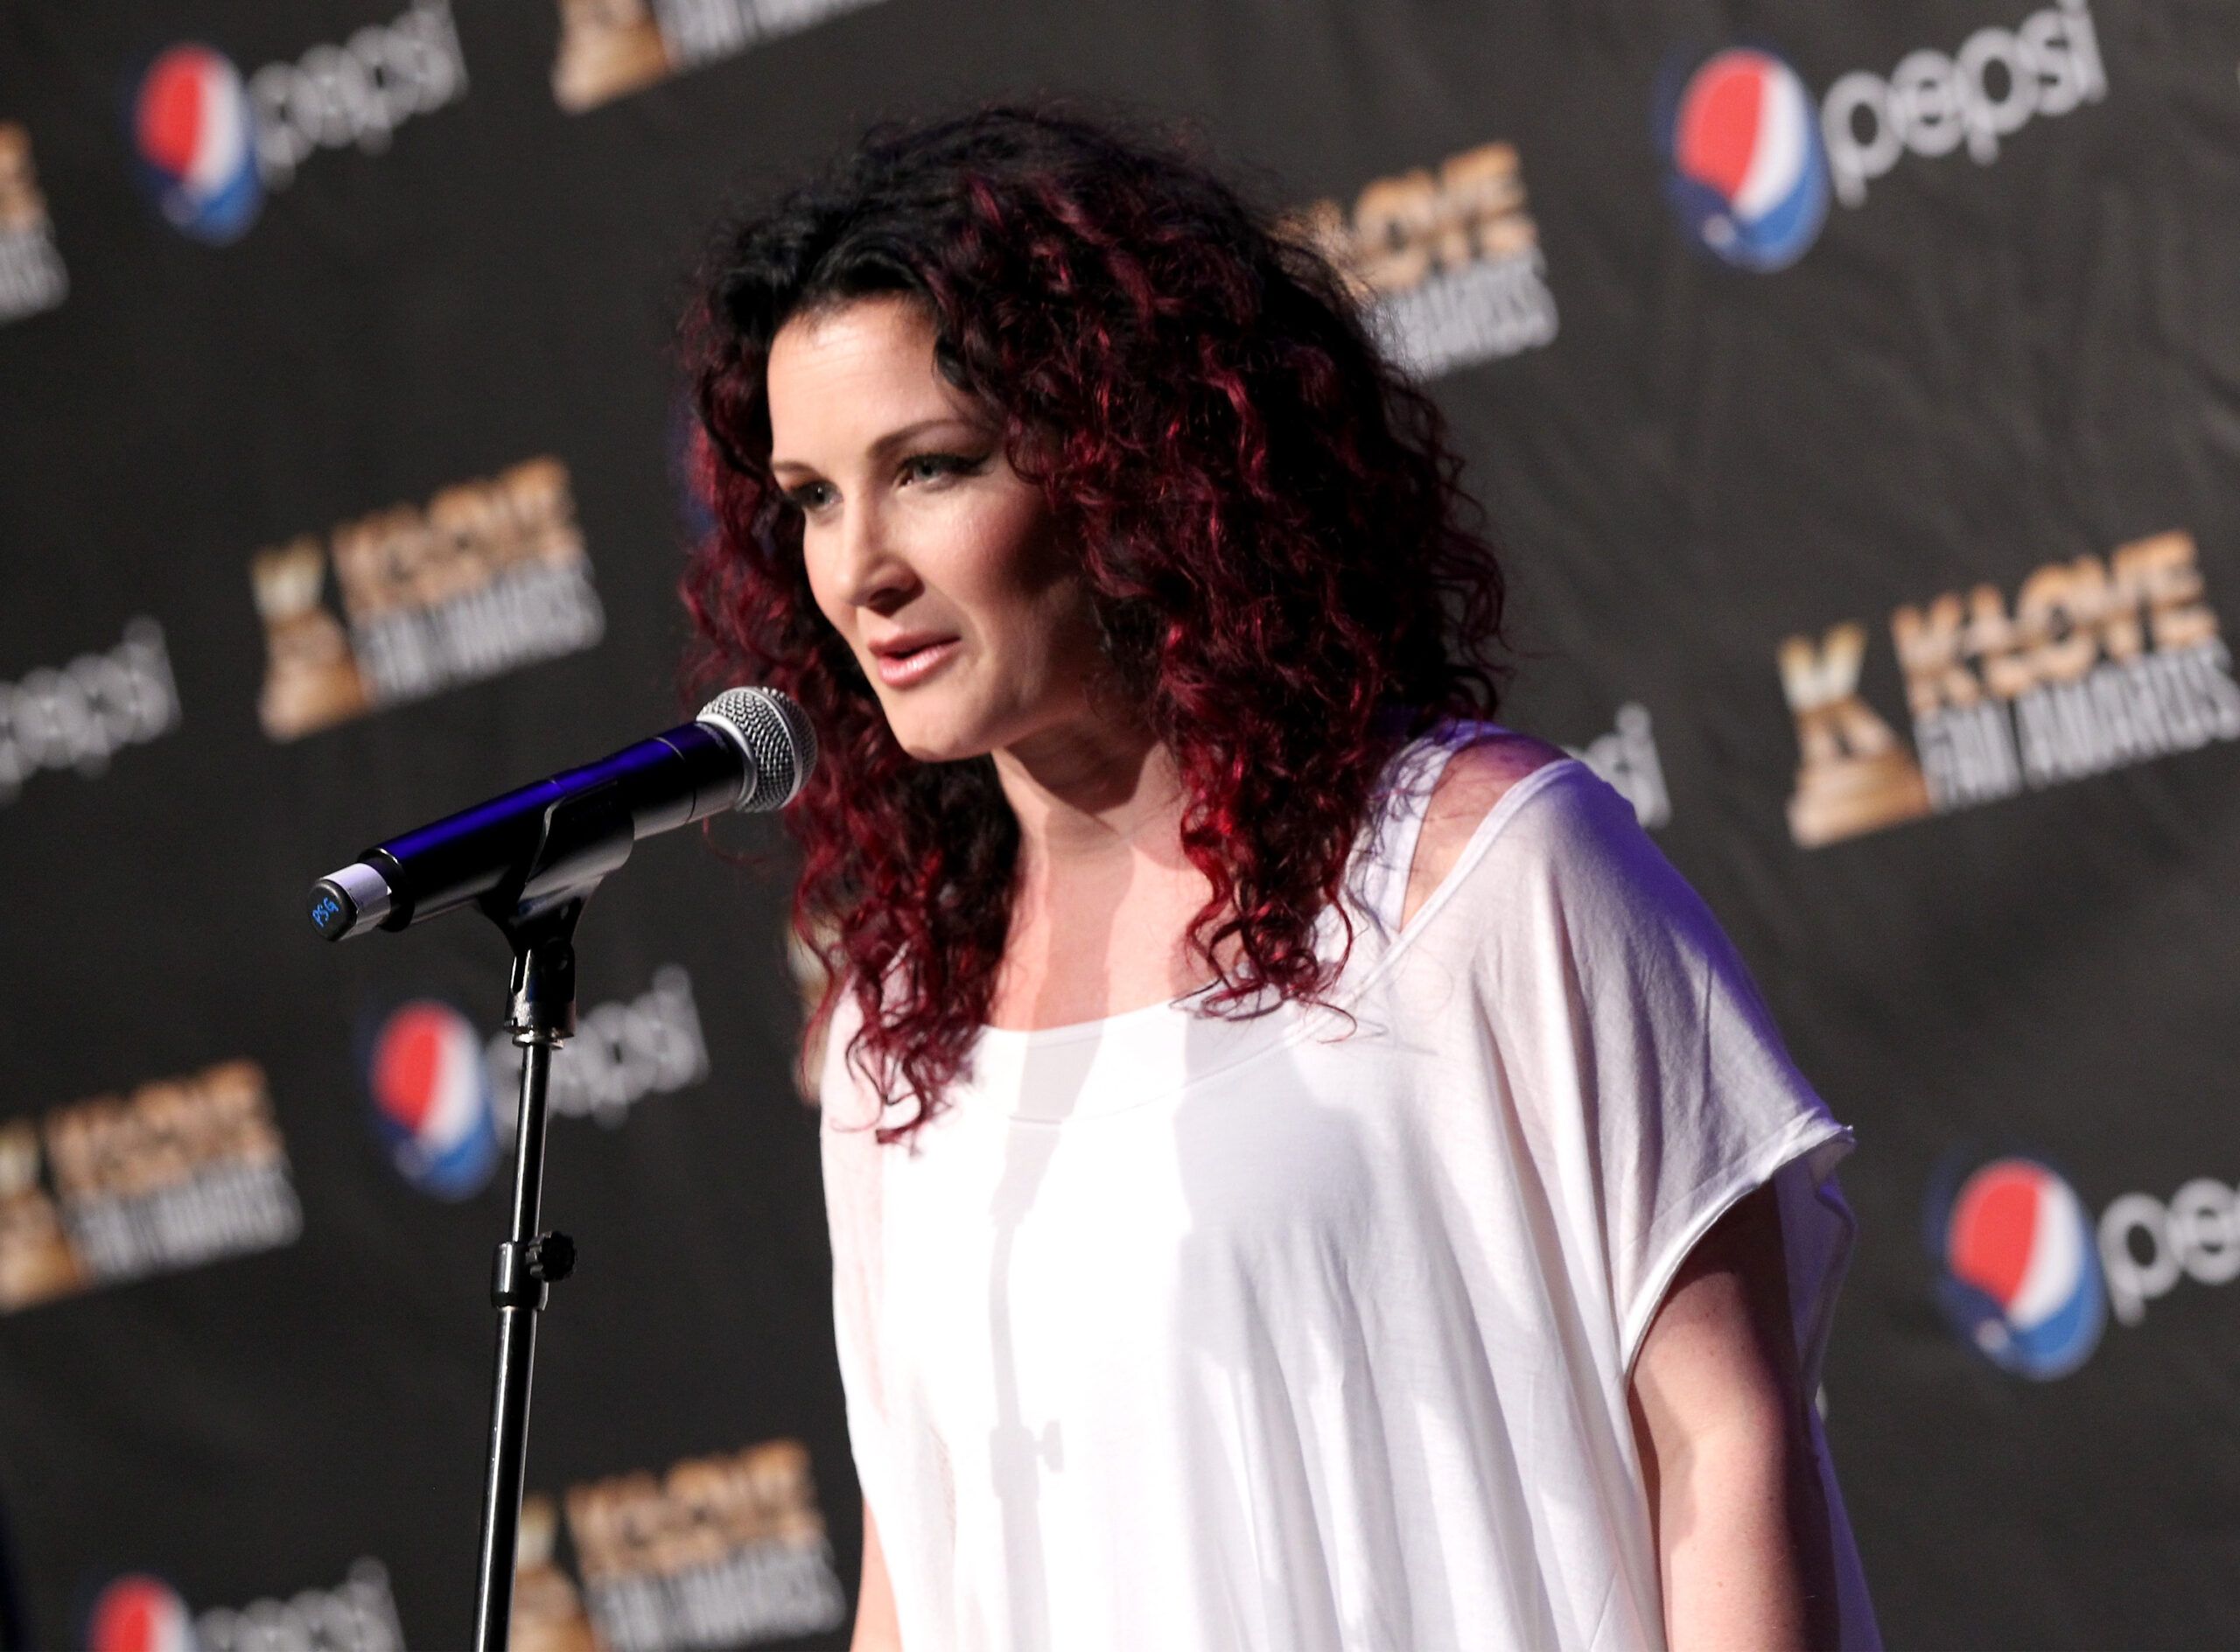 Christian singer Plum answers questions backstage at the K LOVE Fan Awards